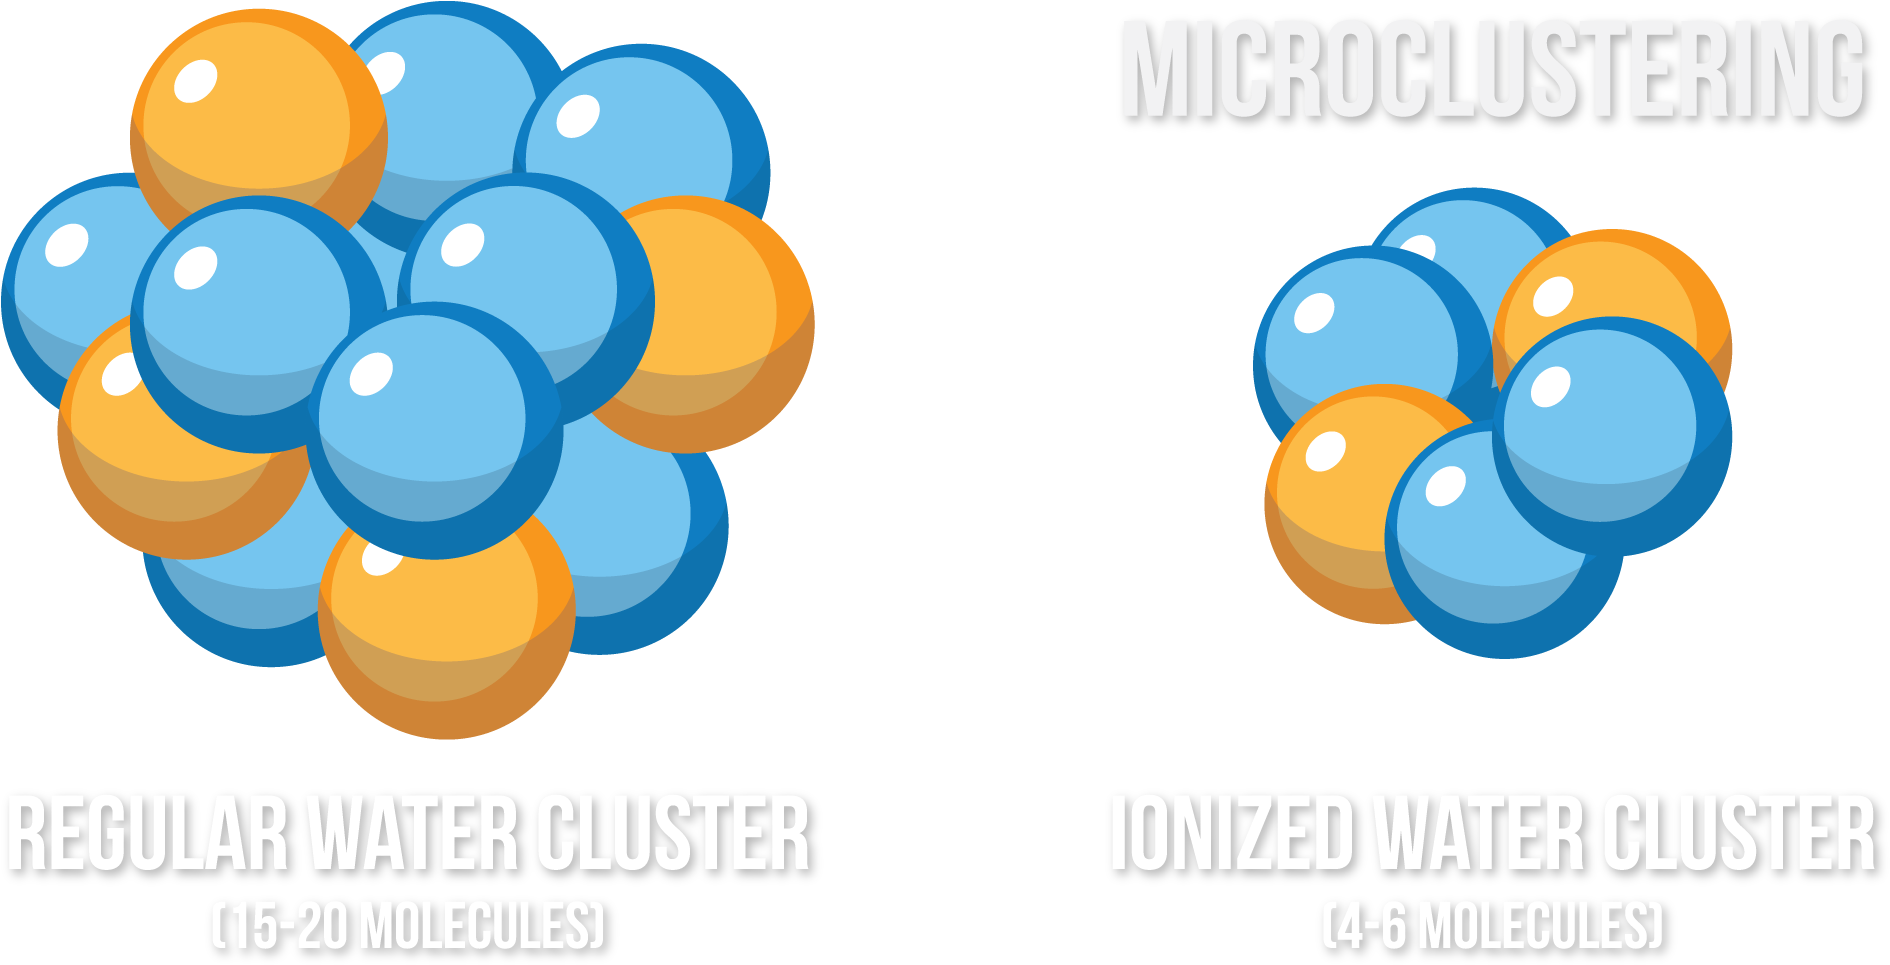 Microcluster - Ionized Water Cluster (1920x1080)